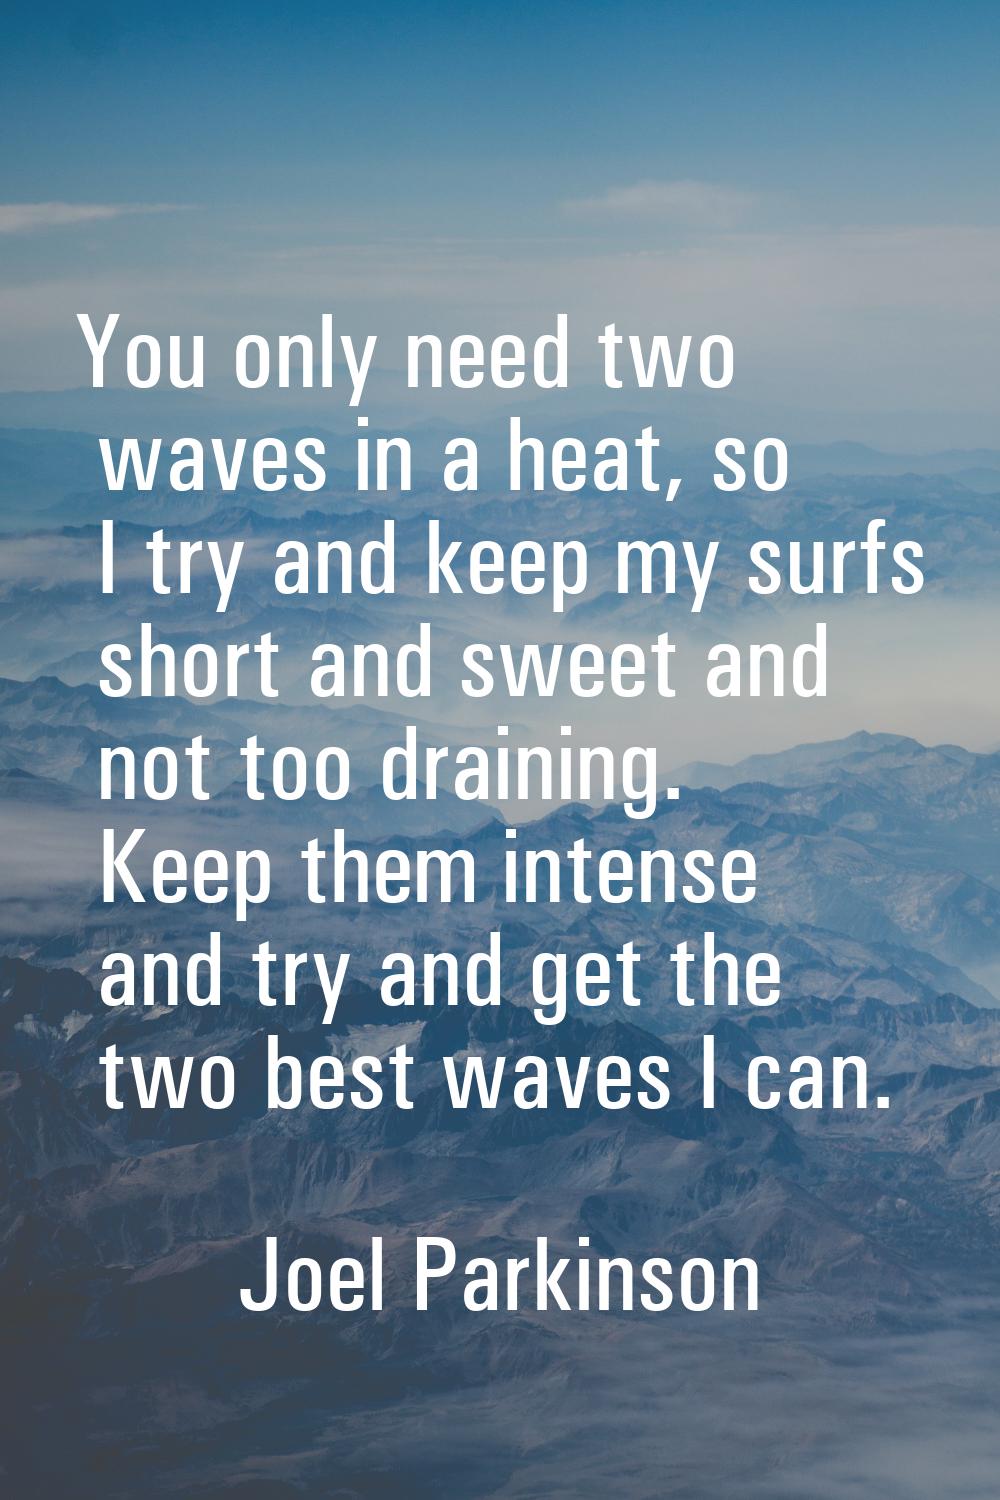 You only need two waves in a heat, so I try and keep my surfs short and sweet and not too draining.